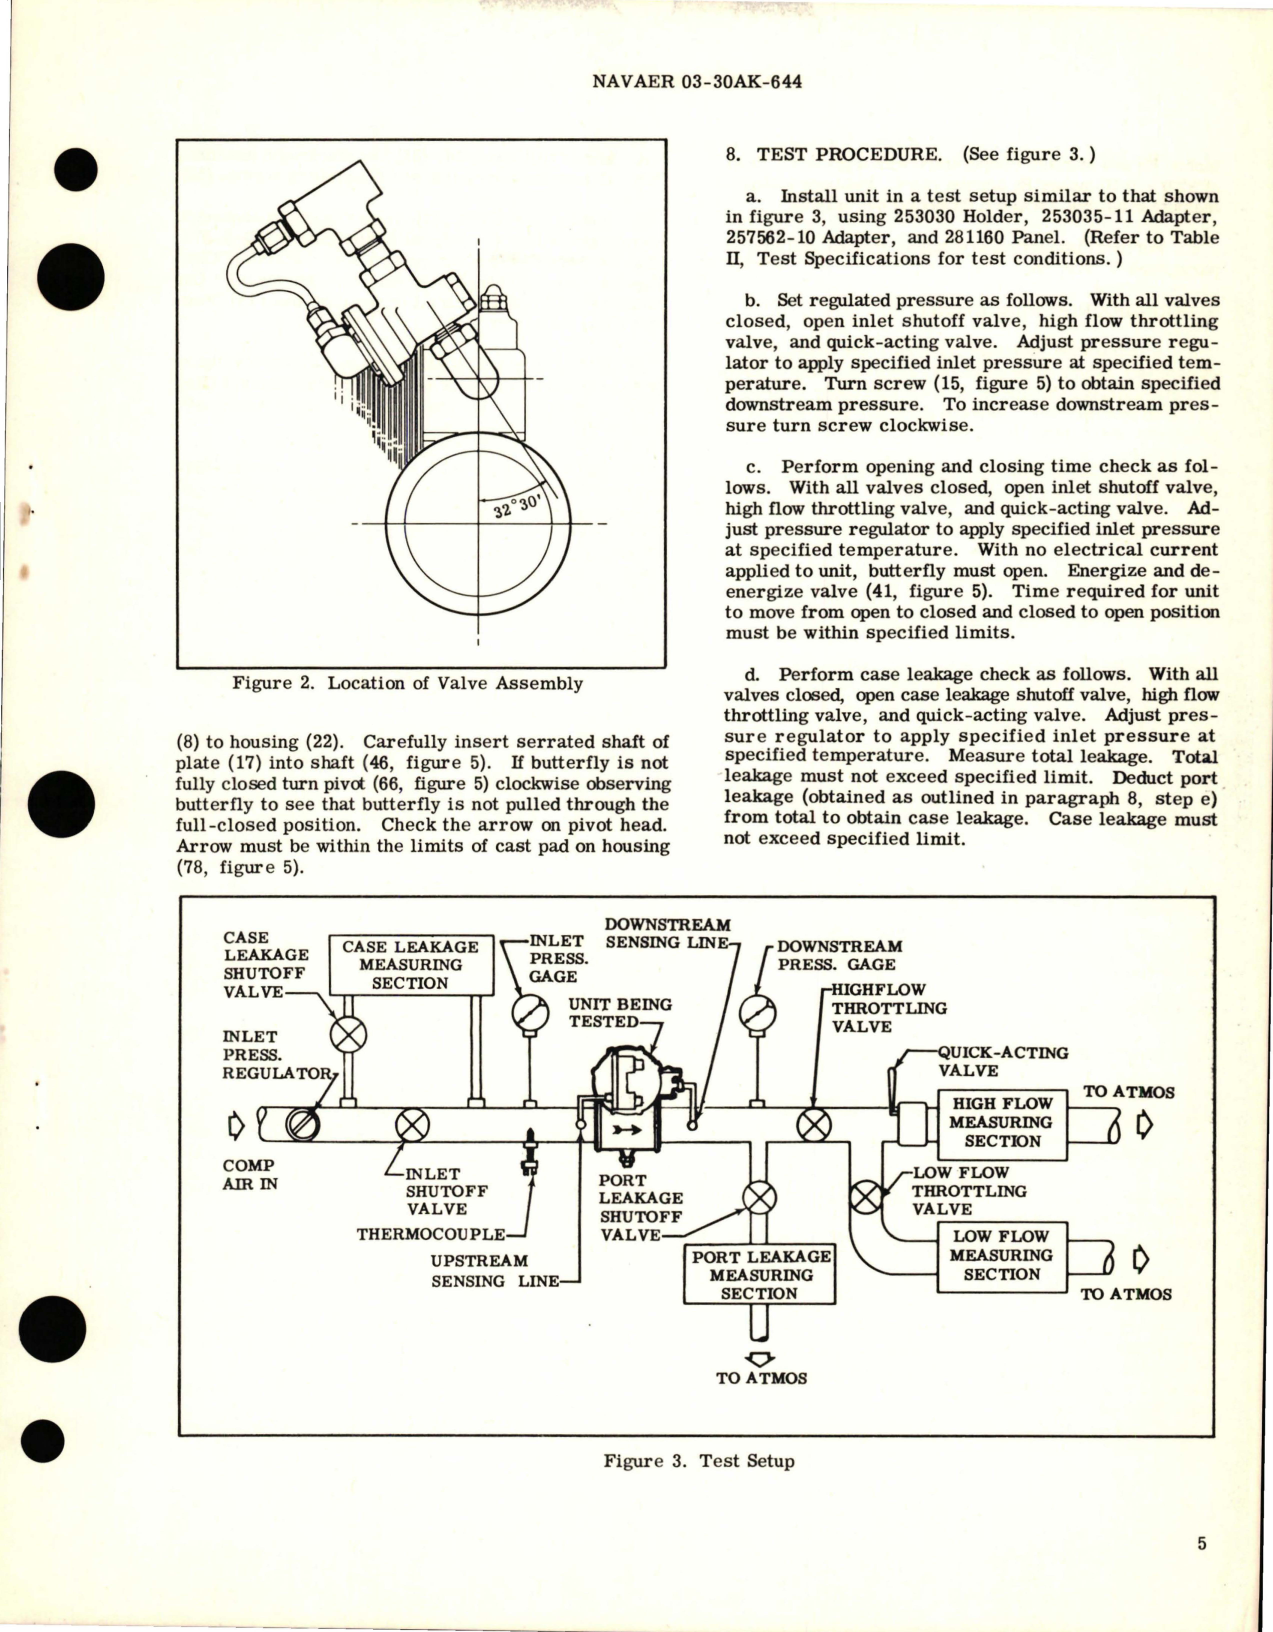 Sample page 5 from AirCorps Library document: Overhaul Instructions with Parts Breakdown for Pressure Regulating Air Shutoff Valve - Part 105230-320-2 